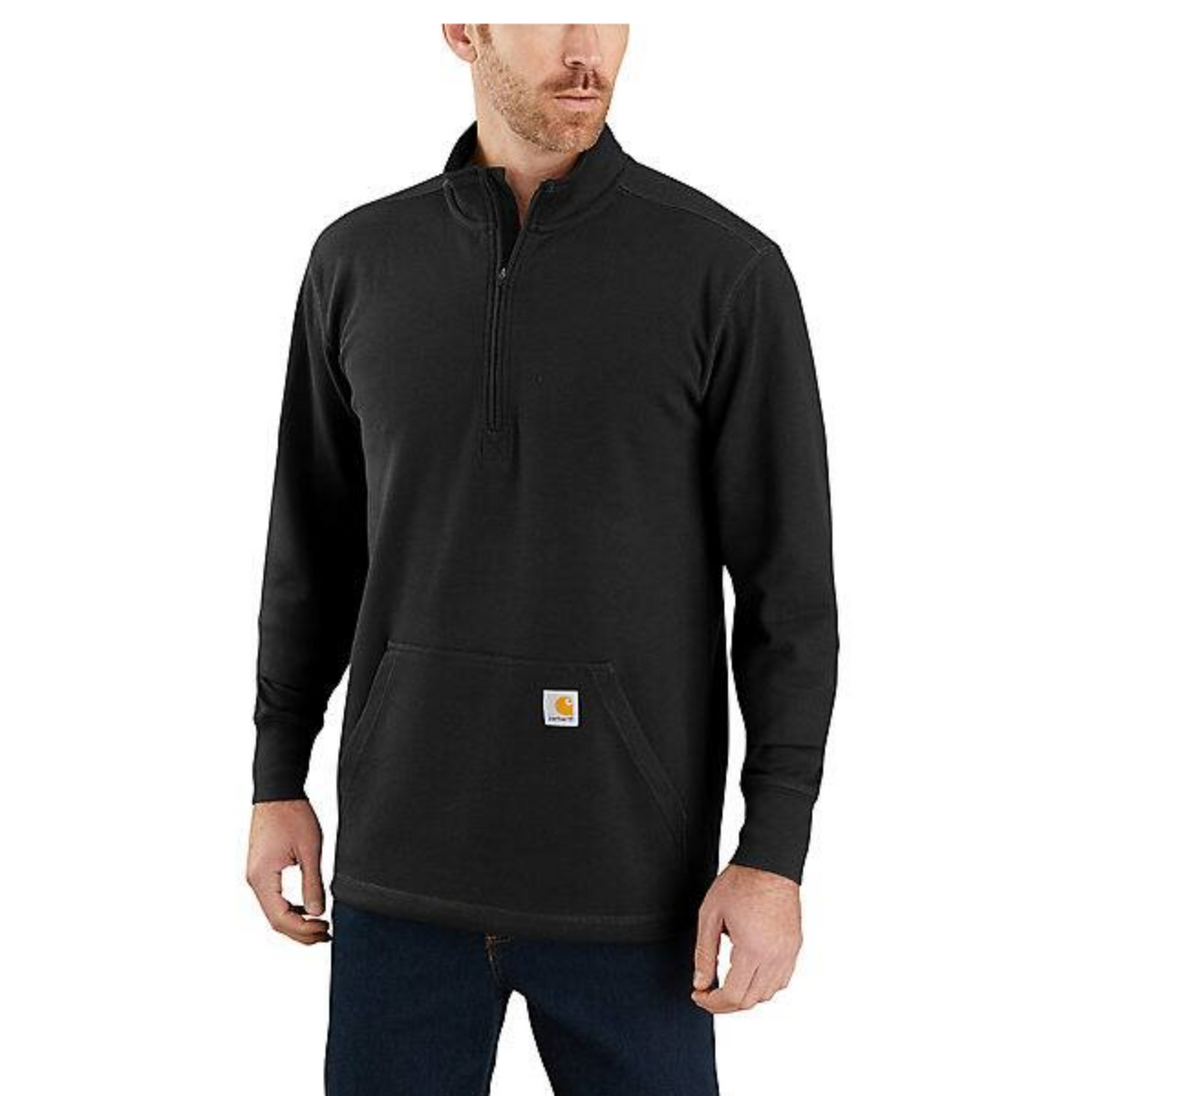 Carhartt Relaxed Fit Thermal Shirt